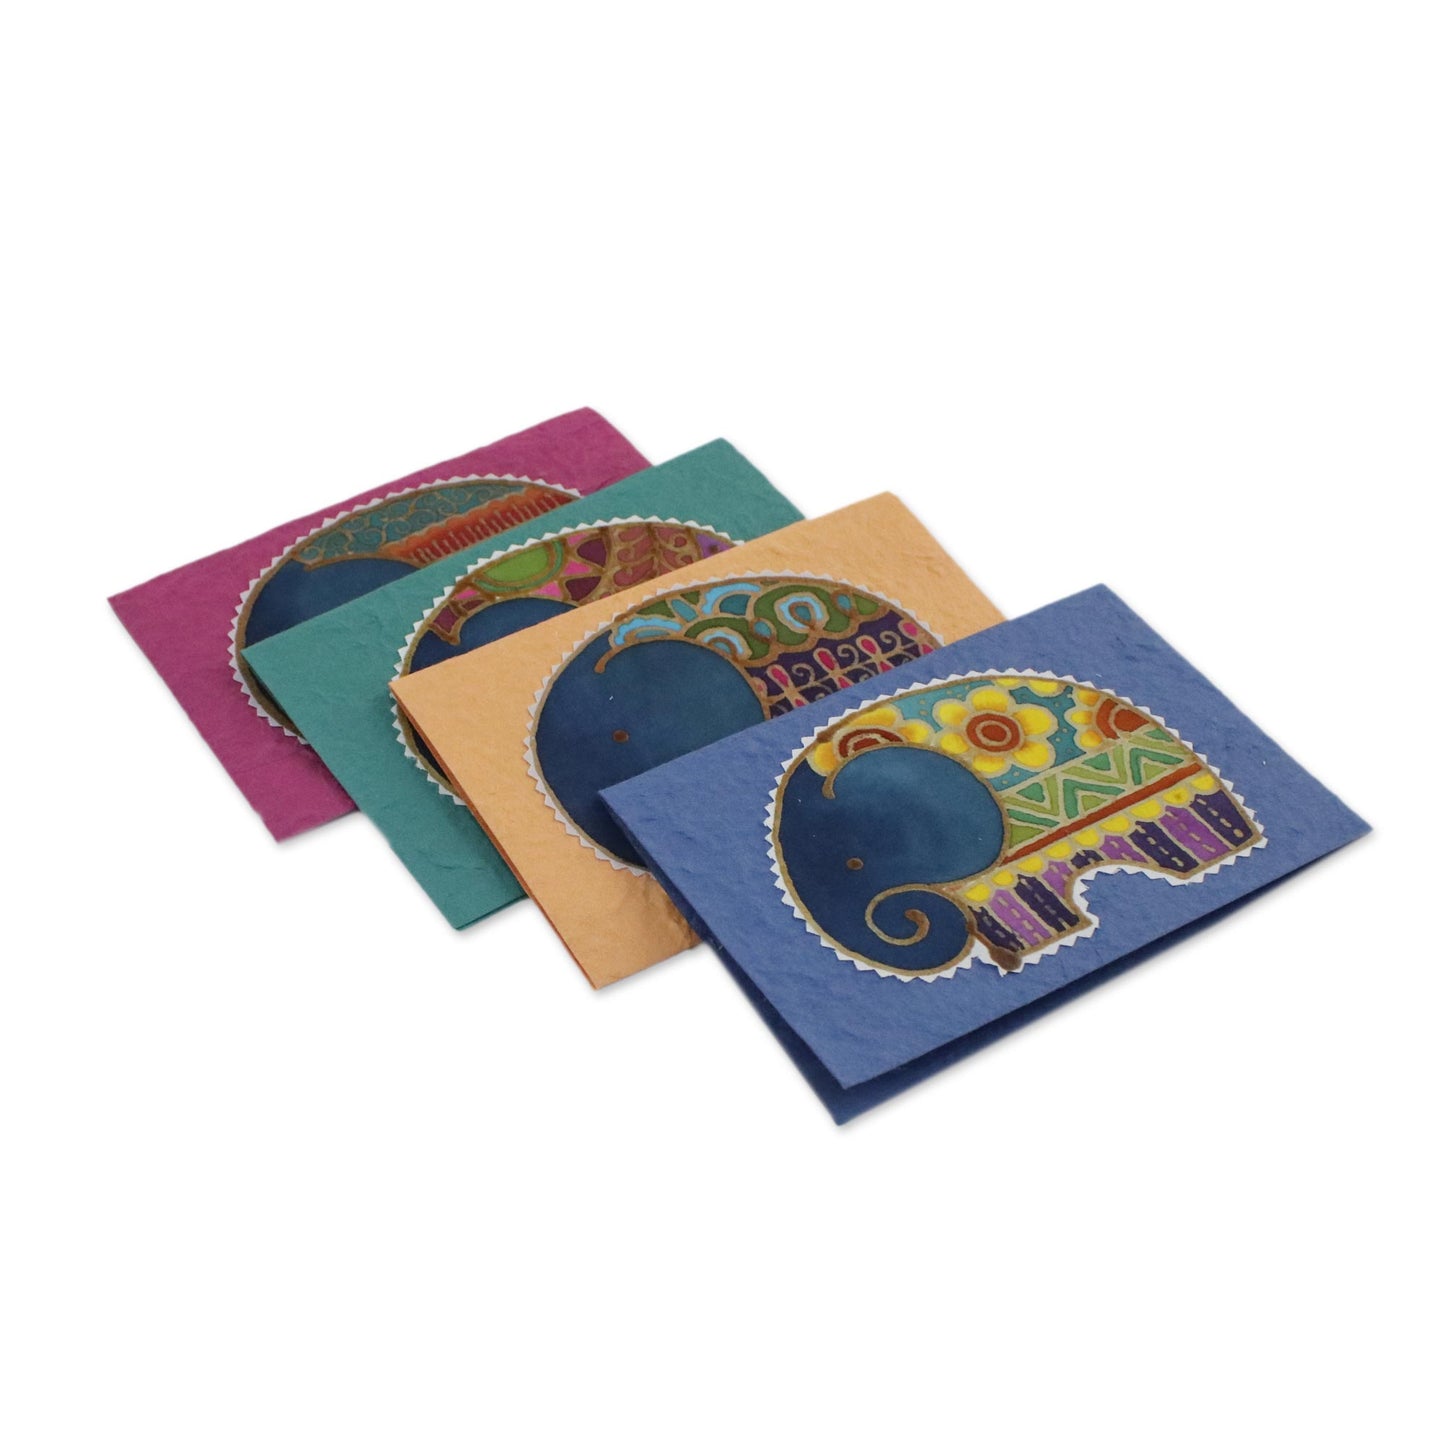 Excited Elephants Set of 4 Batik Cotton and Paper Elephant Greeting Cards